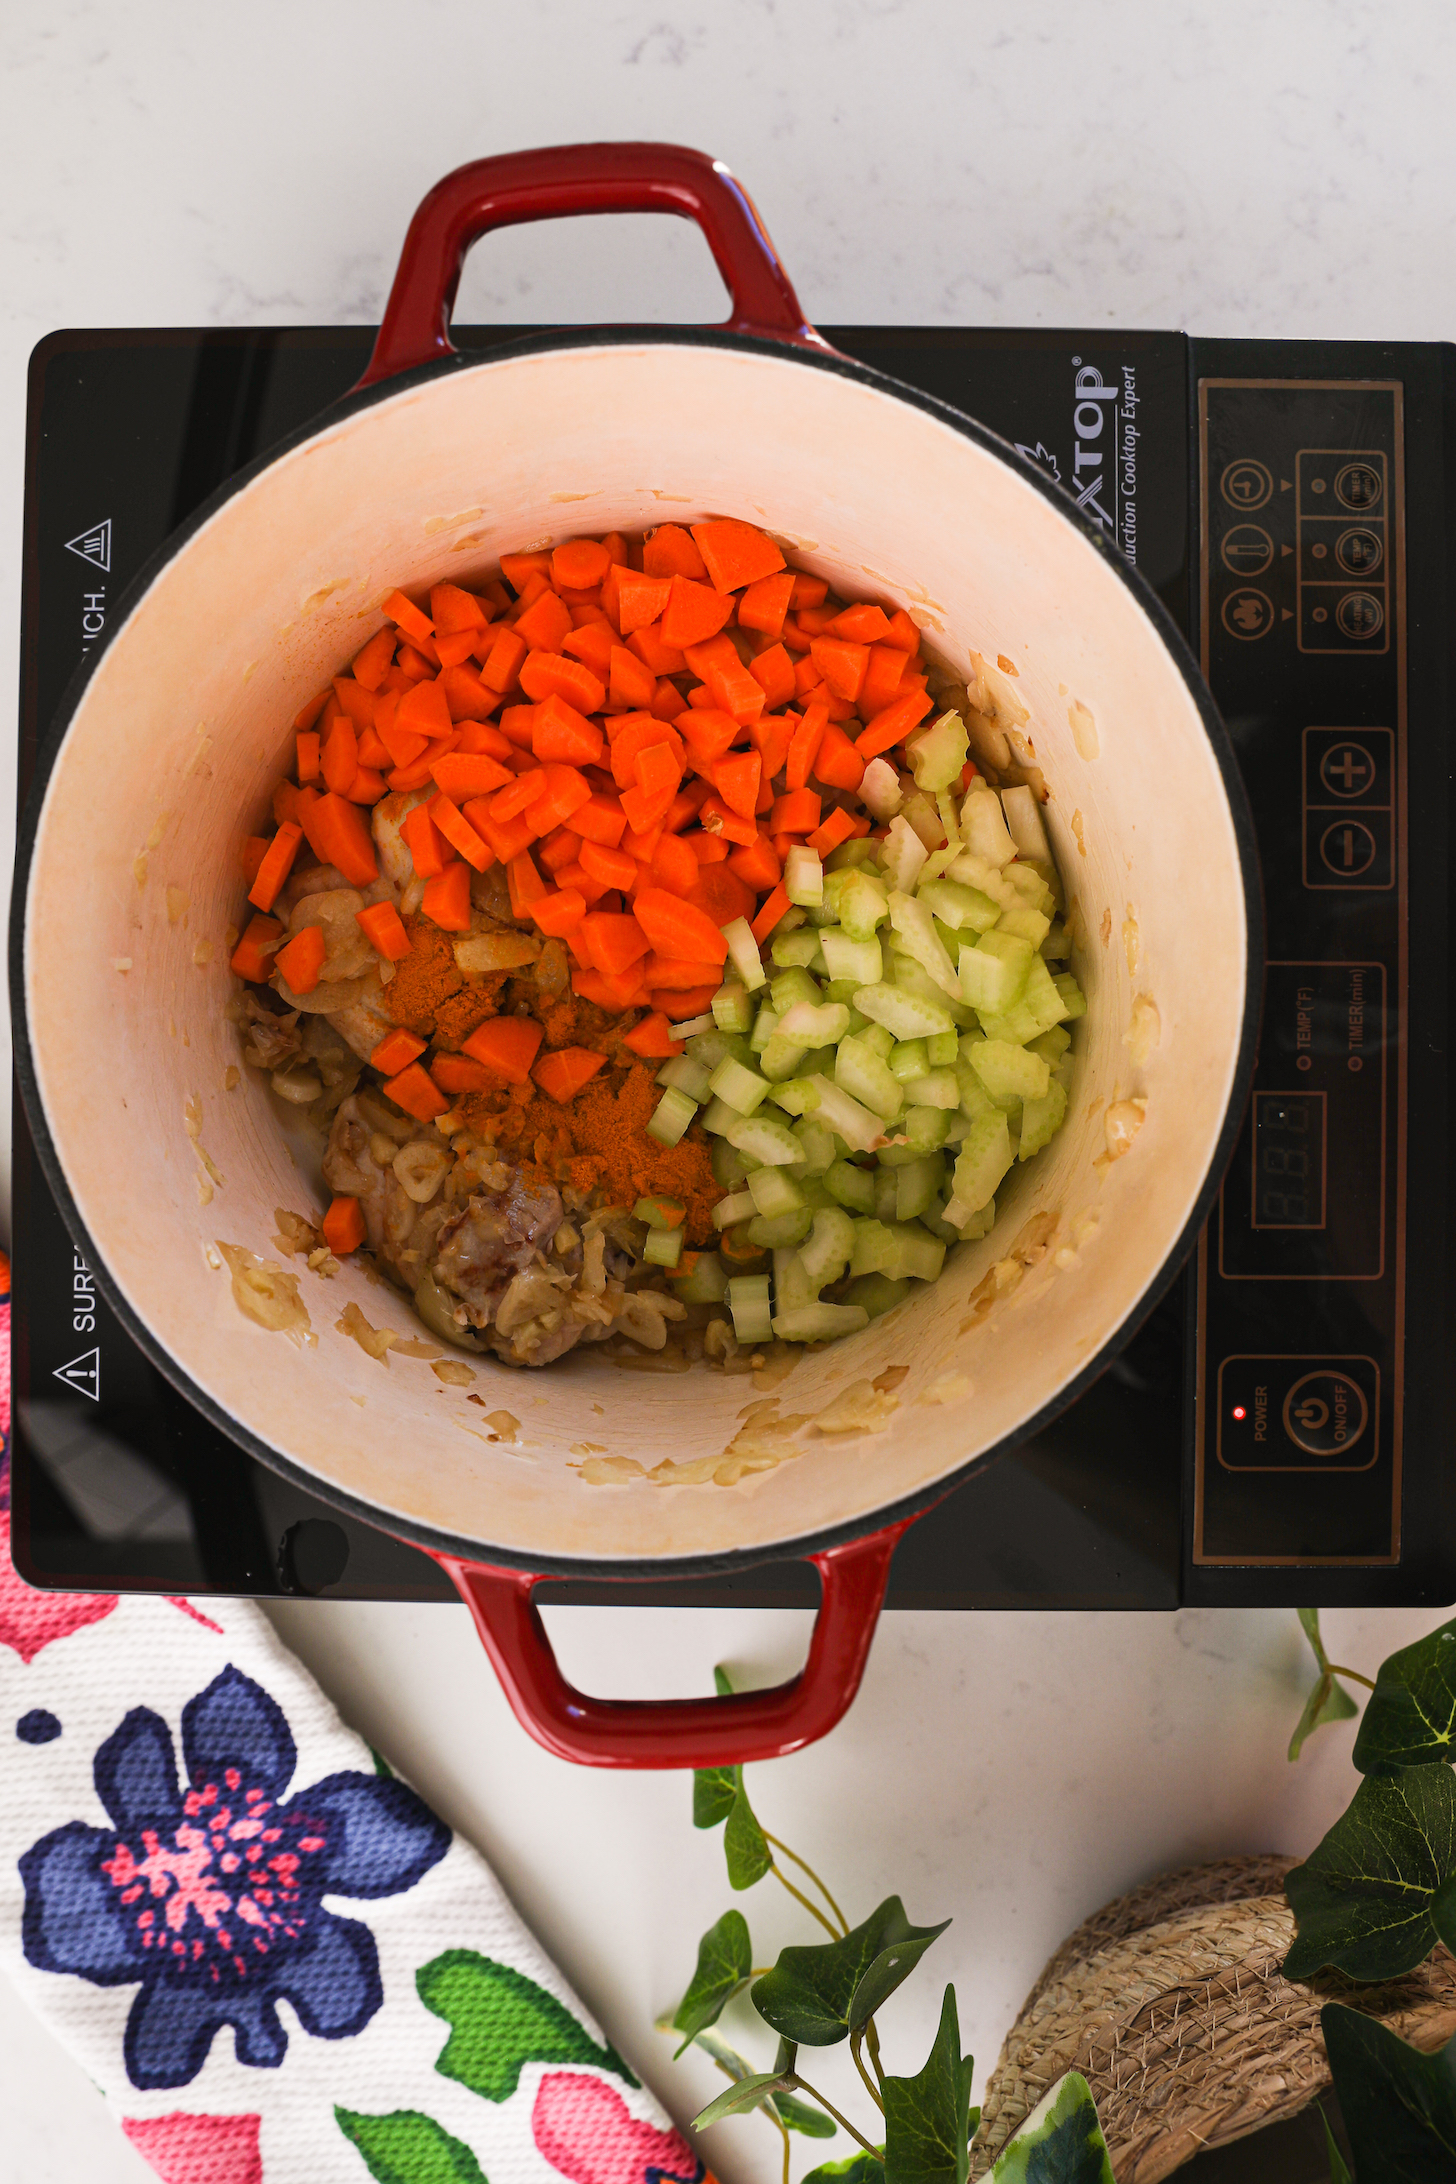 Overhead shot of a cooking pot with vegetables in it.